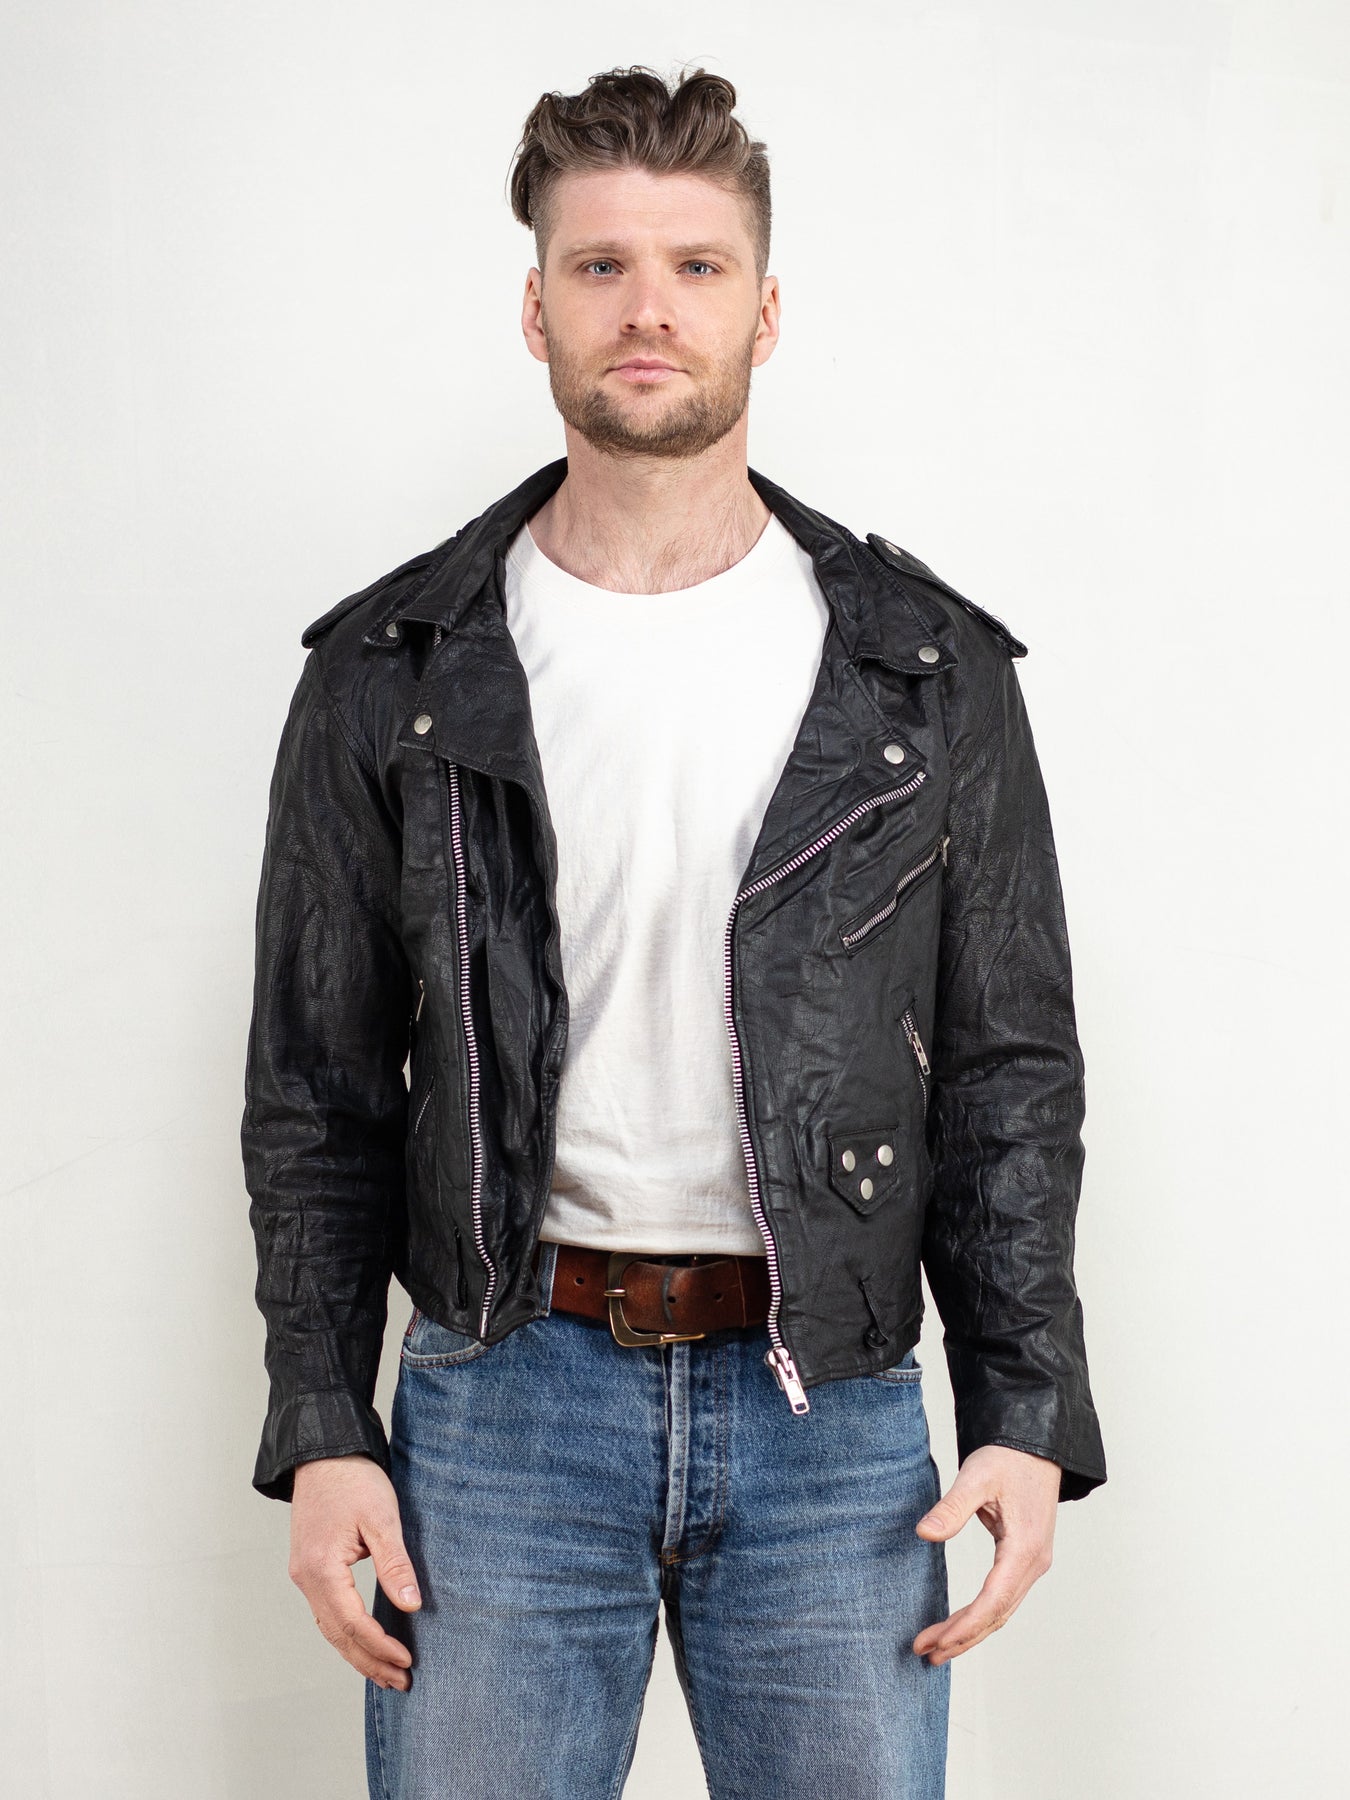 Mens Vintage Leather Jackets | Northern Grip – Page 2 – NorthernGrip